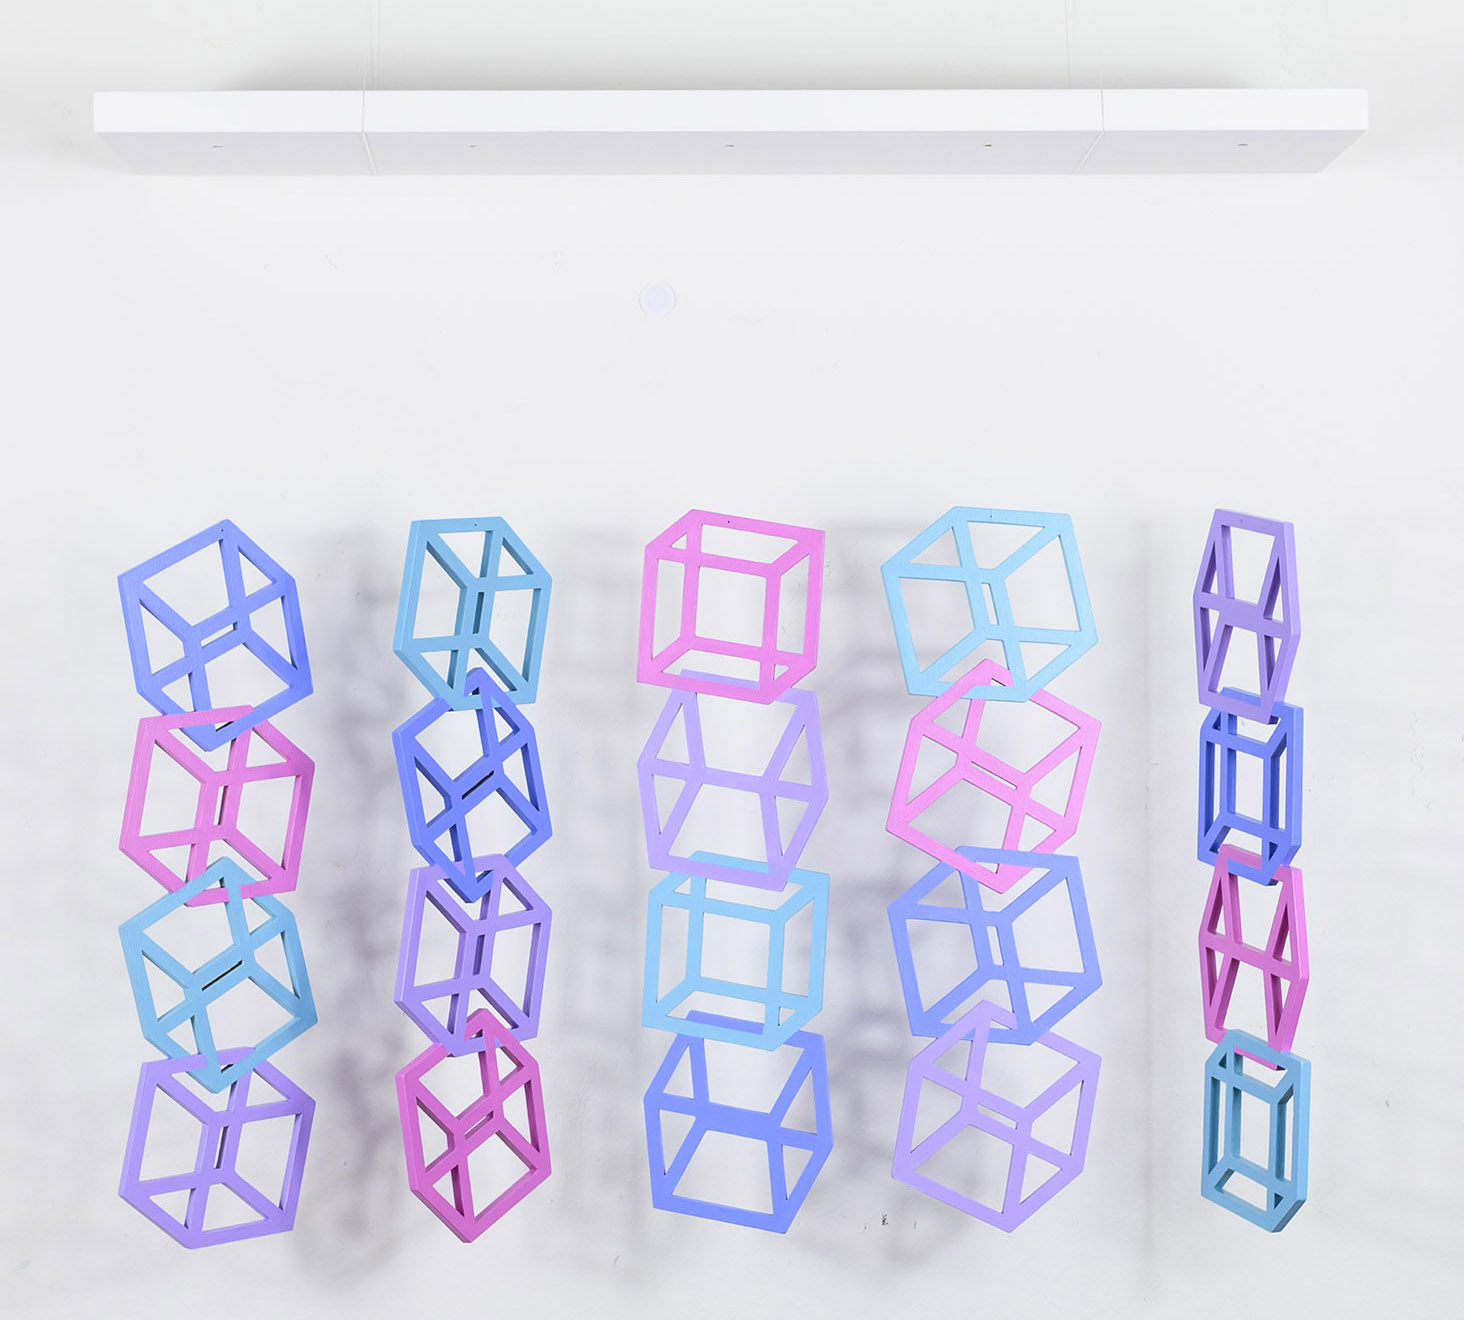 Nested cubes